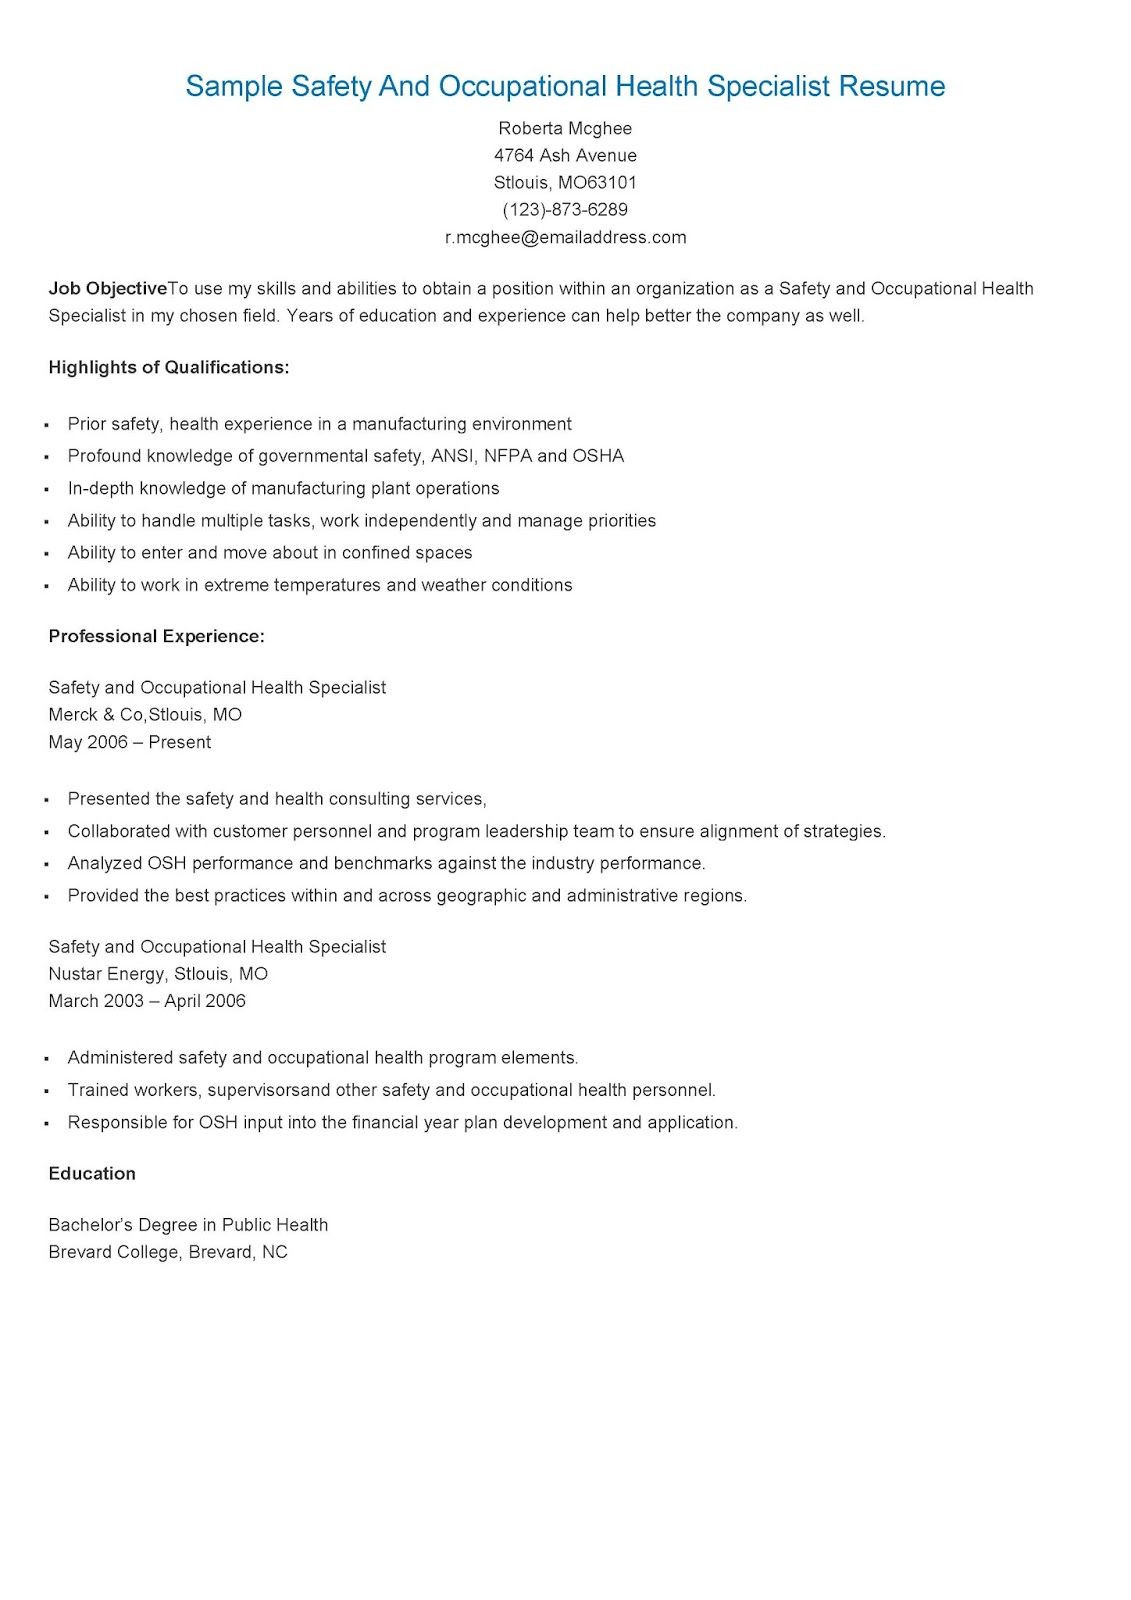 Occupational Health and Safety Resume Templates Sample Safety and Occupational Health Specialist Resume Resume …